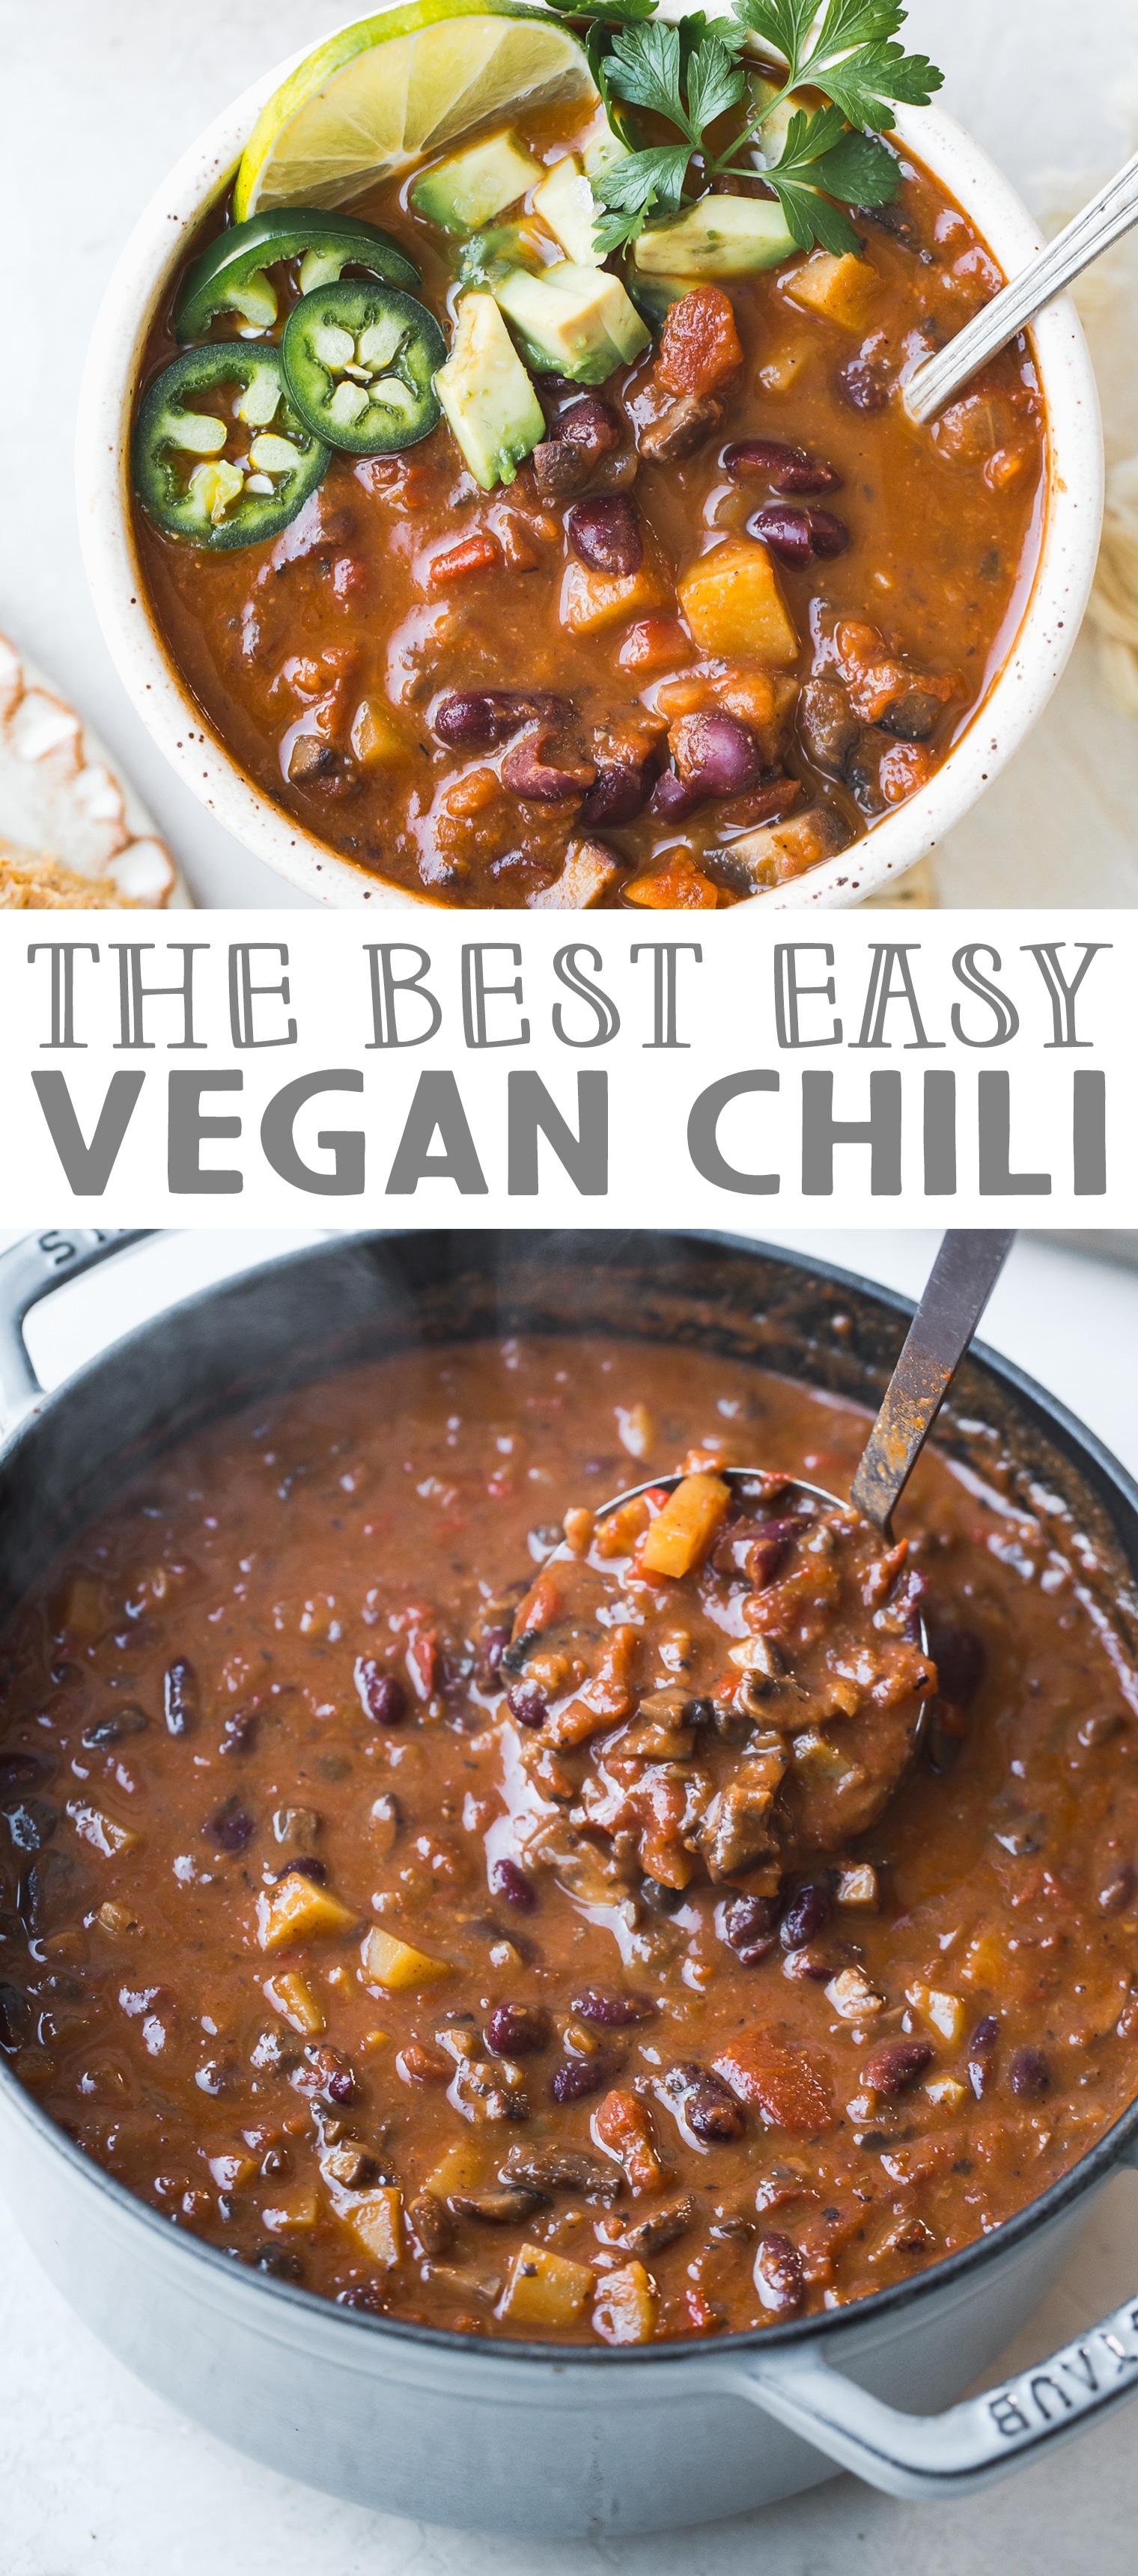 This Vegan Chili doesn't lack any heartiness just because it doesn't have any meat. It's loaded up with veggies, beans, and tons of spices -- this is the BEST vegan chili recipe I've had!